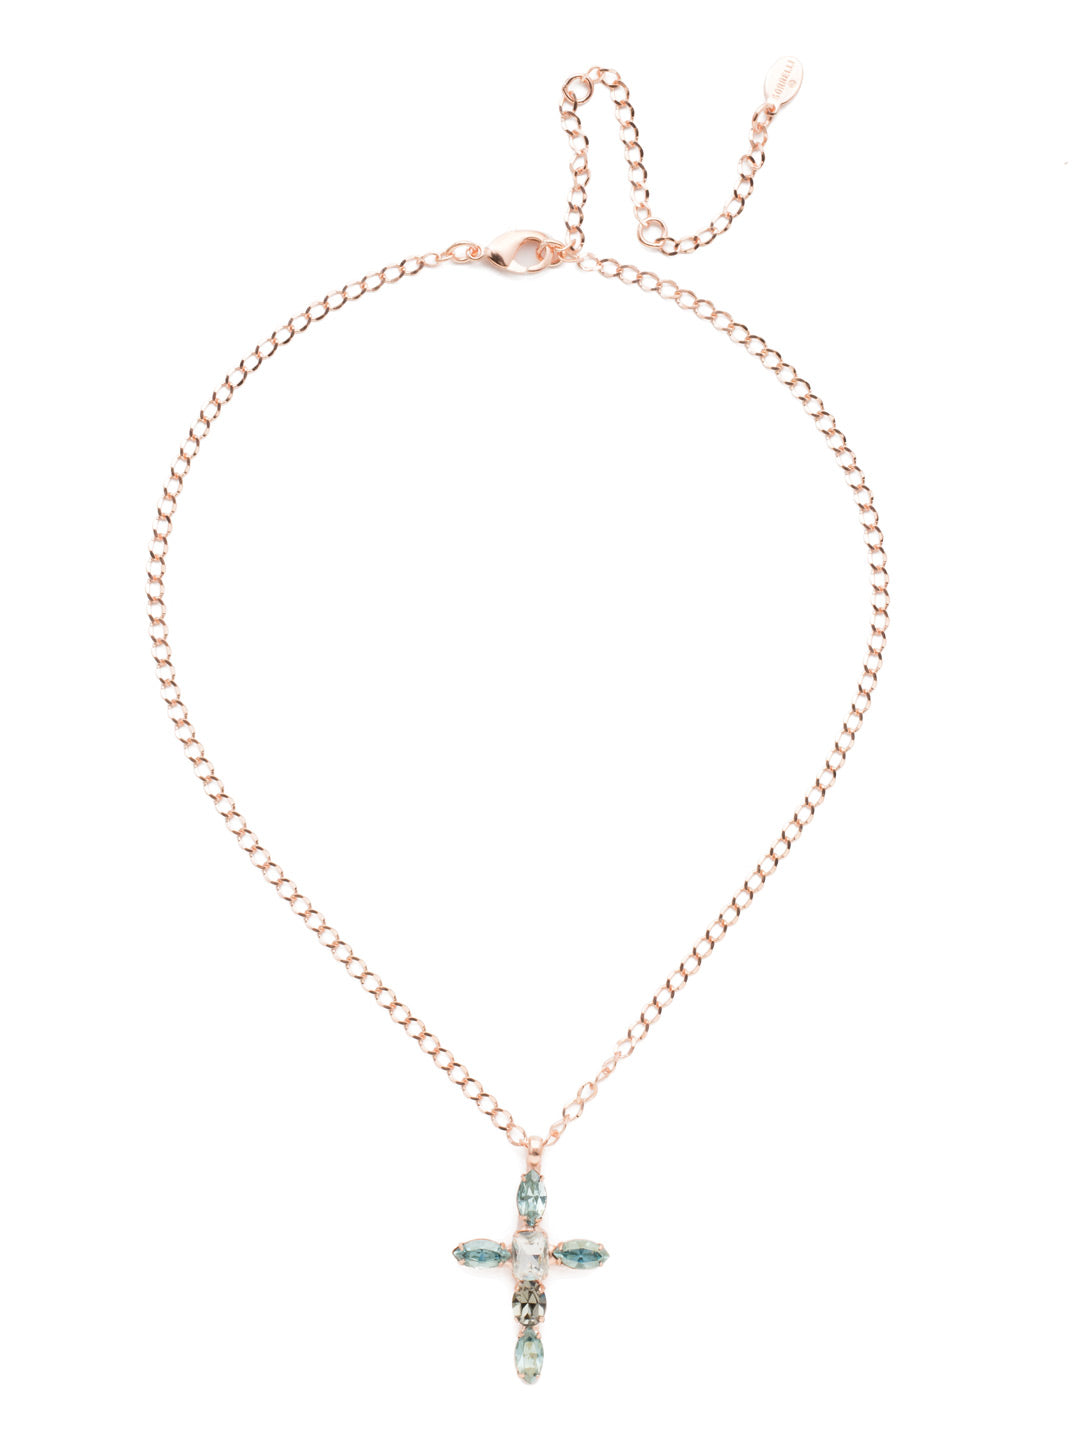 Sarah Pendant Necklace - NET17RGCAZ - The Sarah Pendant Necklace features a cross at the center crafted entirely of sparking crystals in an assortment of shapes. From Sorrelli's Crystal Azure collection in our Rose Gold-tone finish.